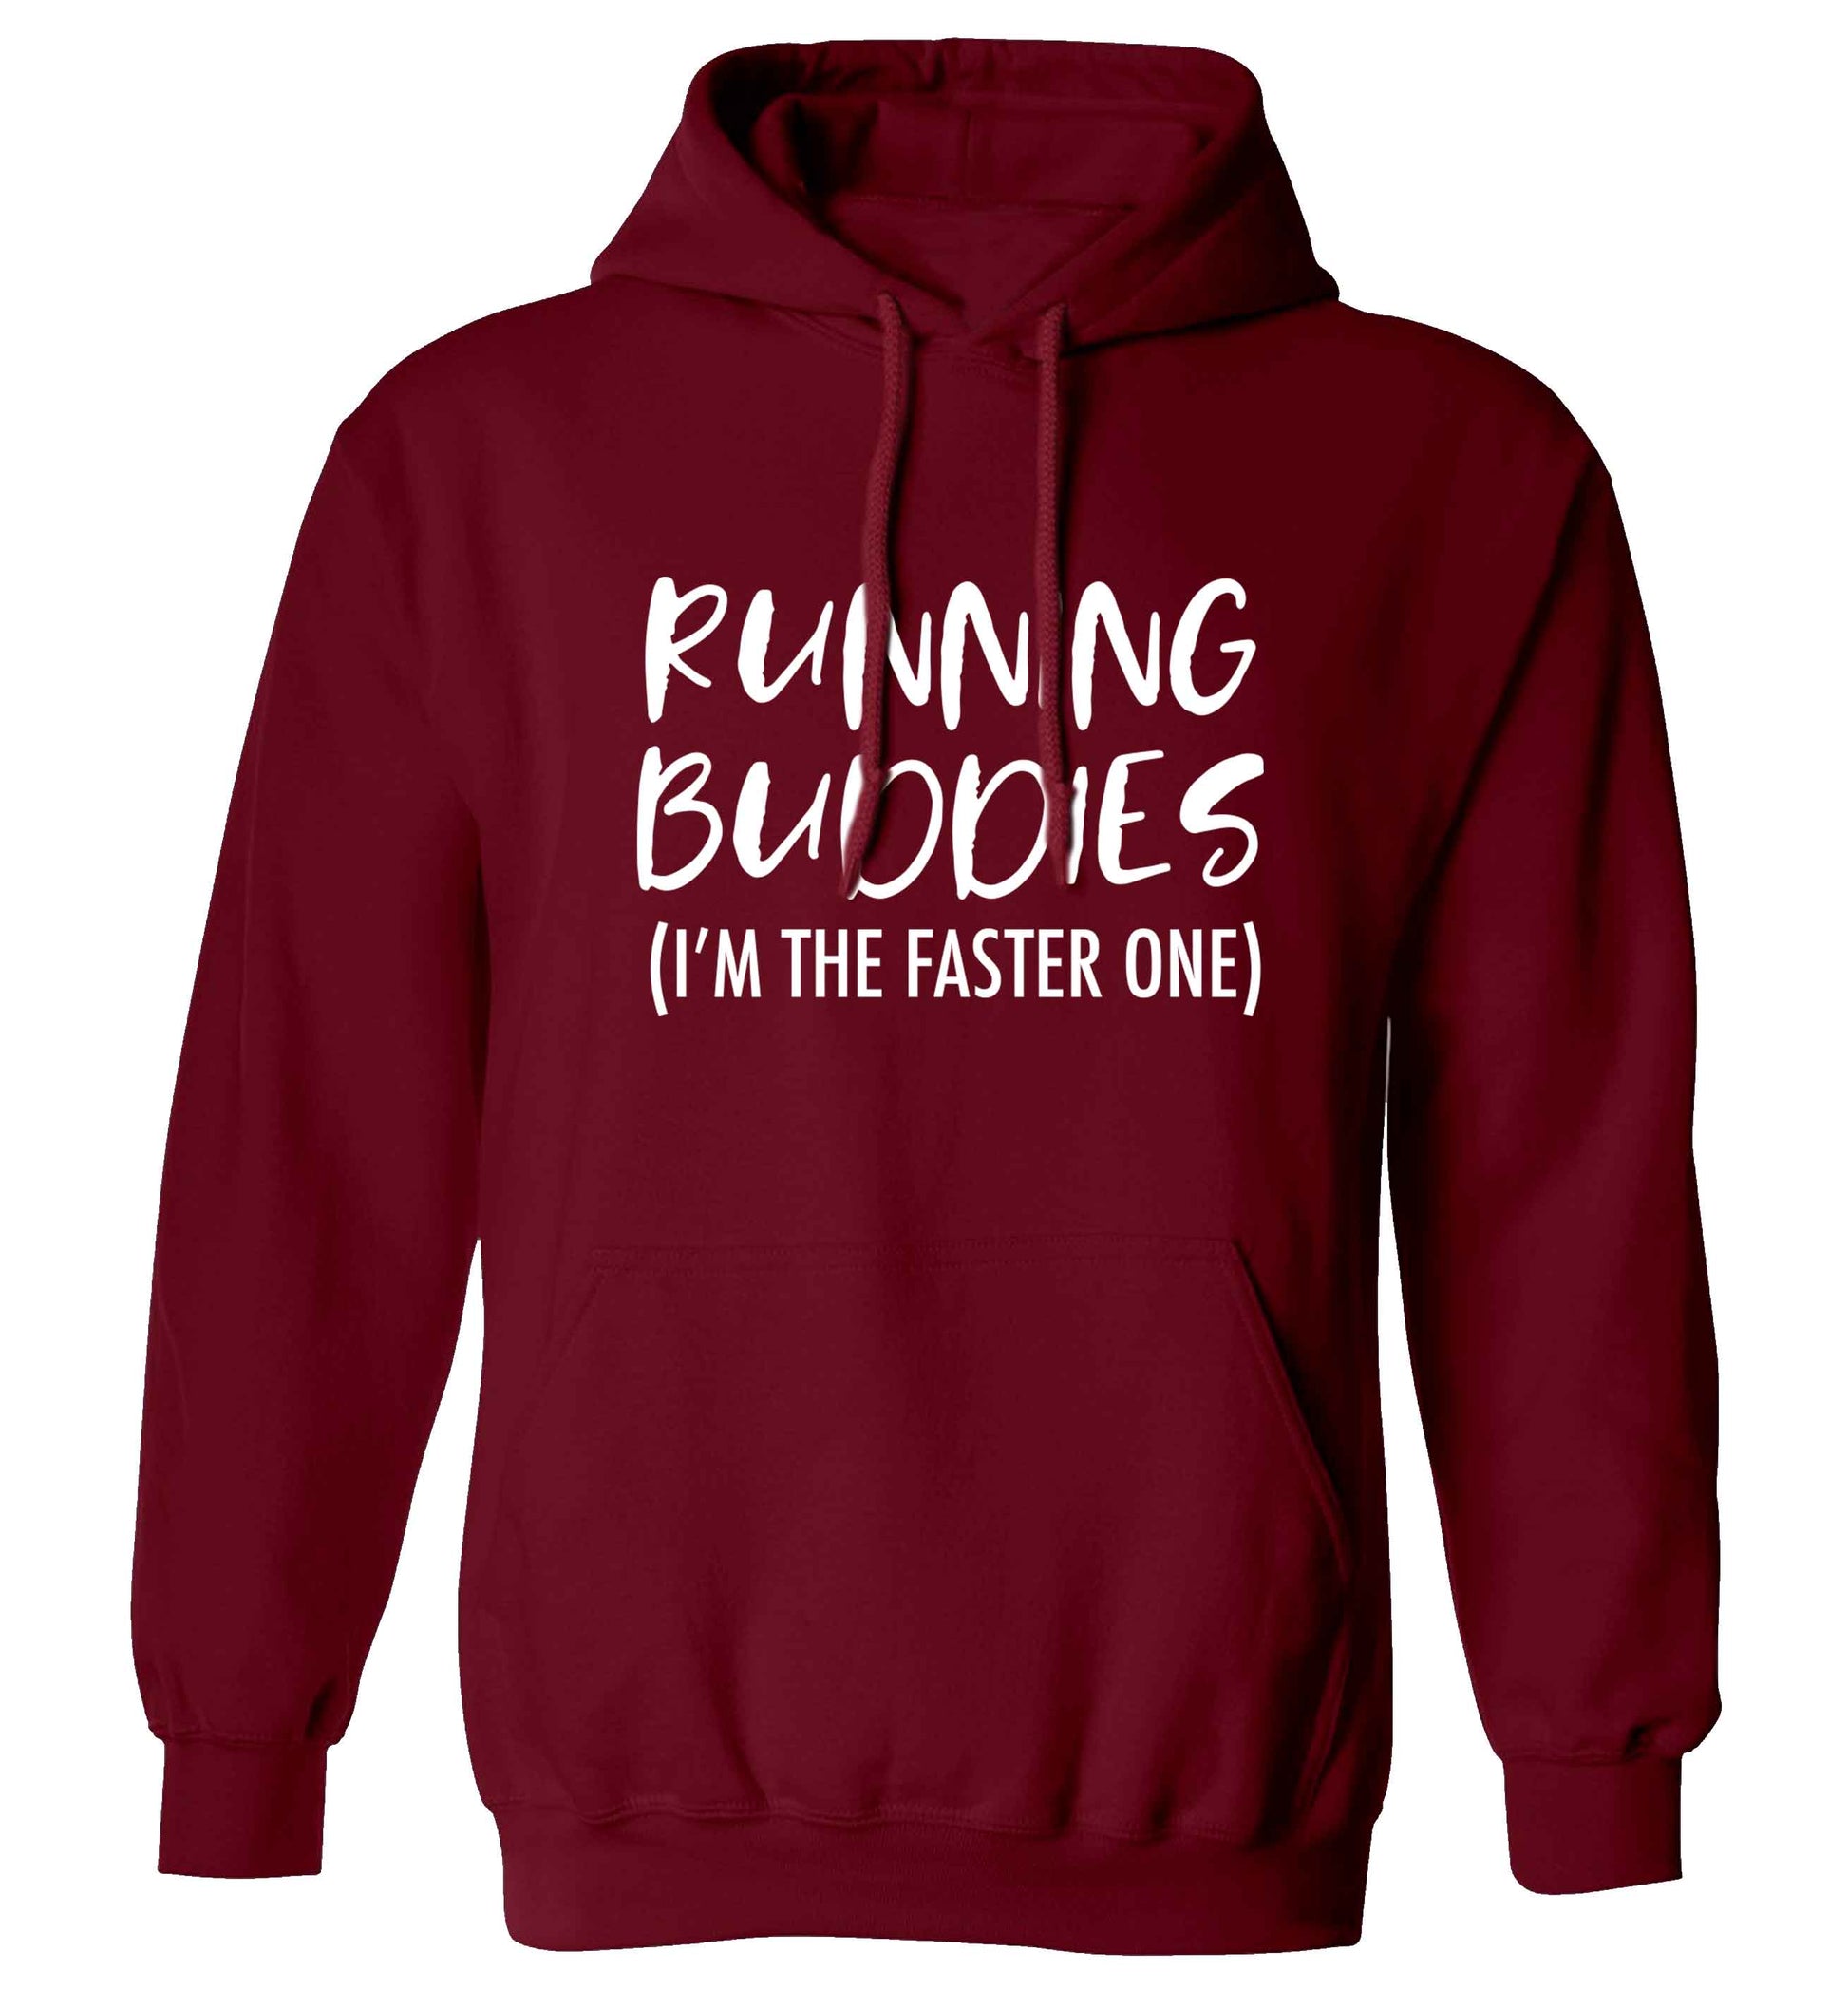 Running buddies (I'm the faster one) adults unisex maroon hoodie 2XL